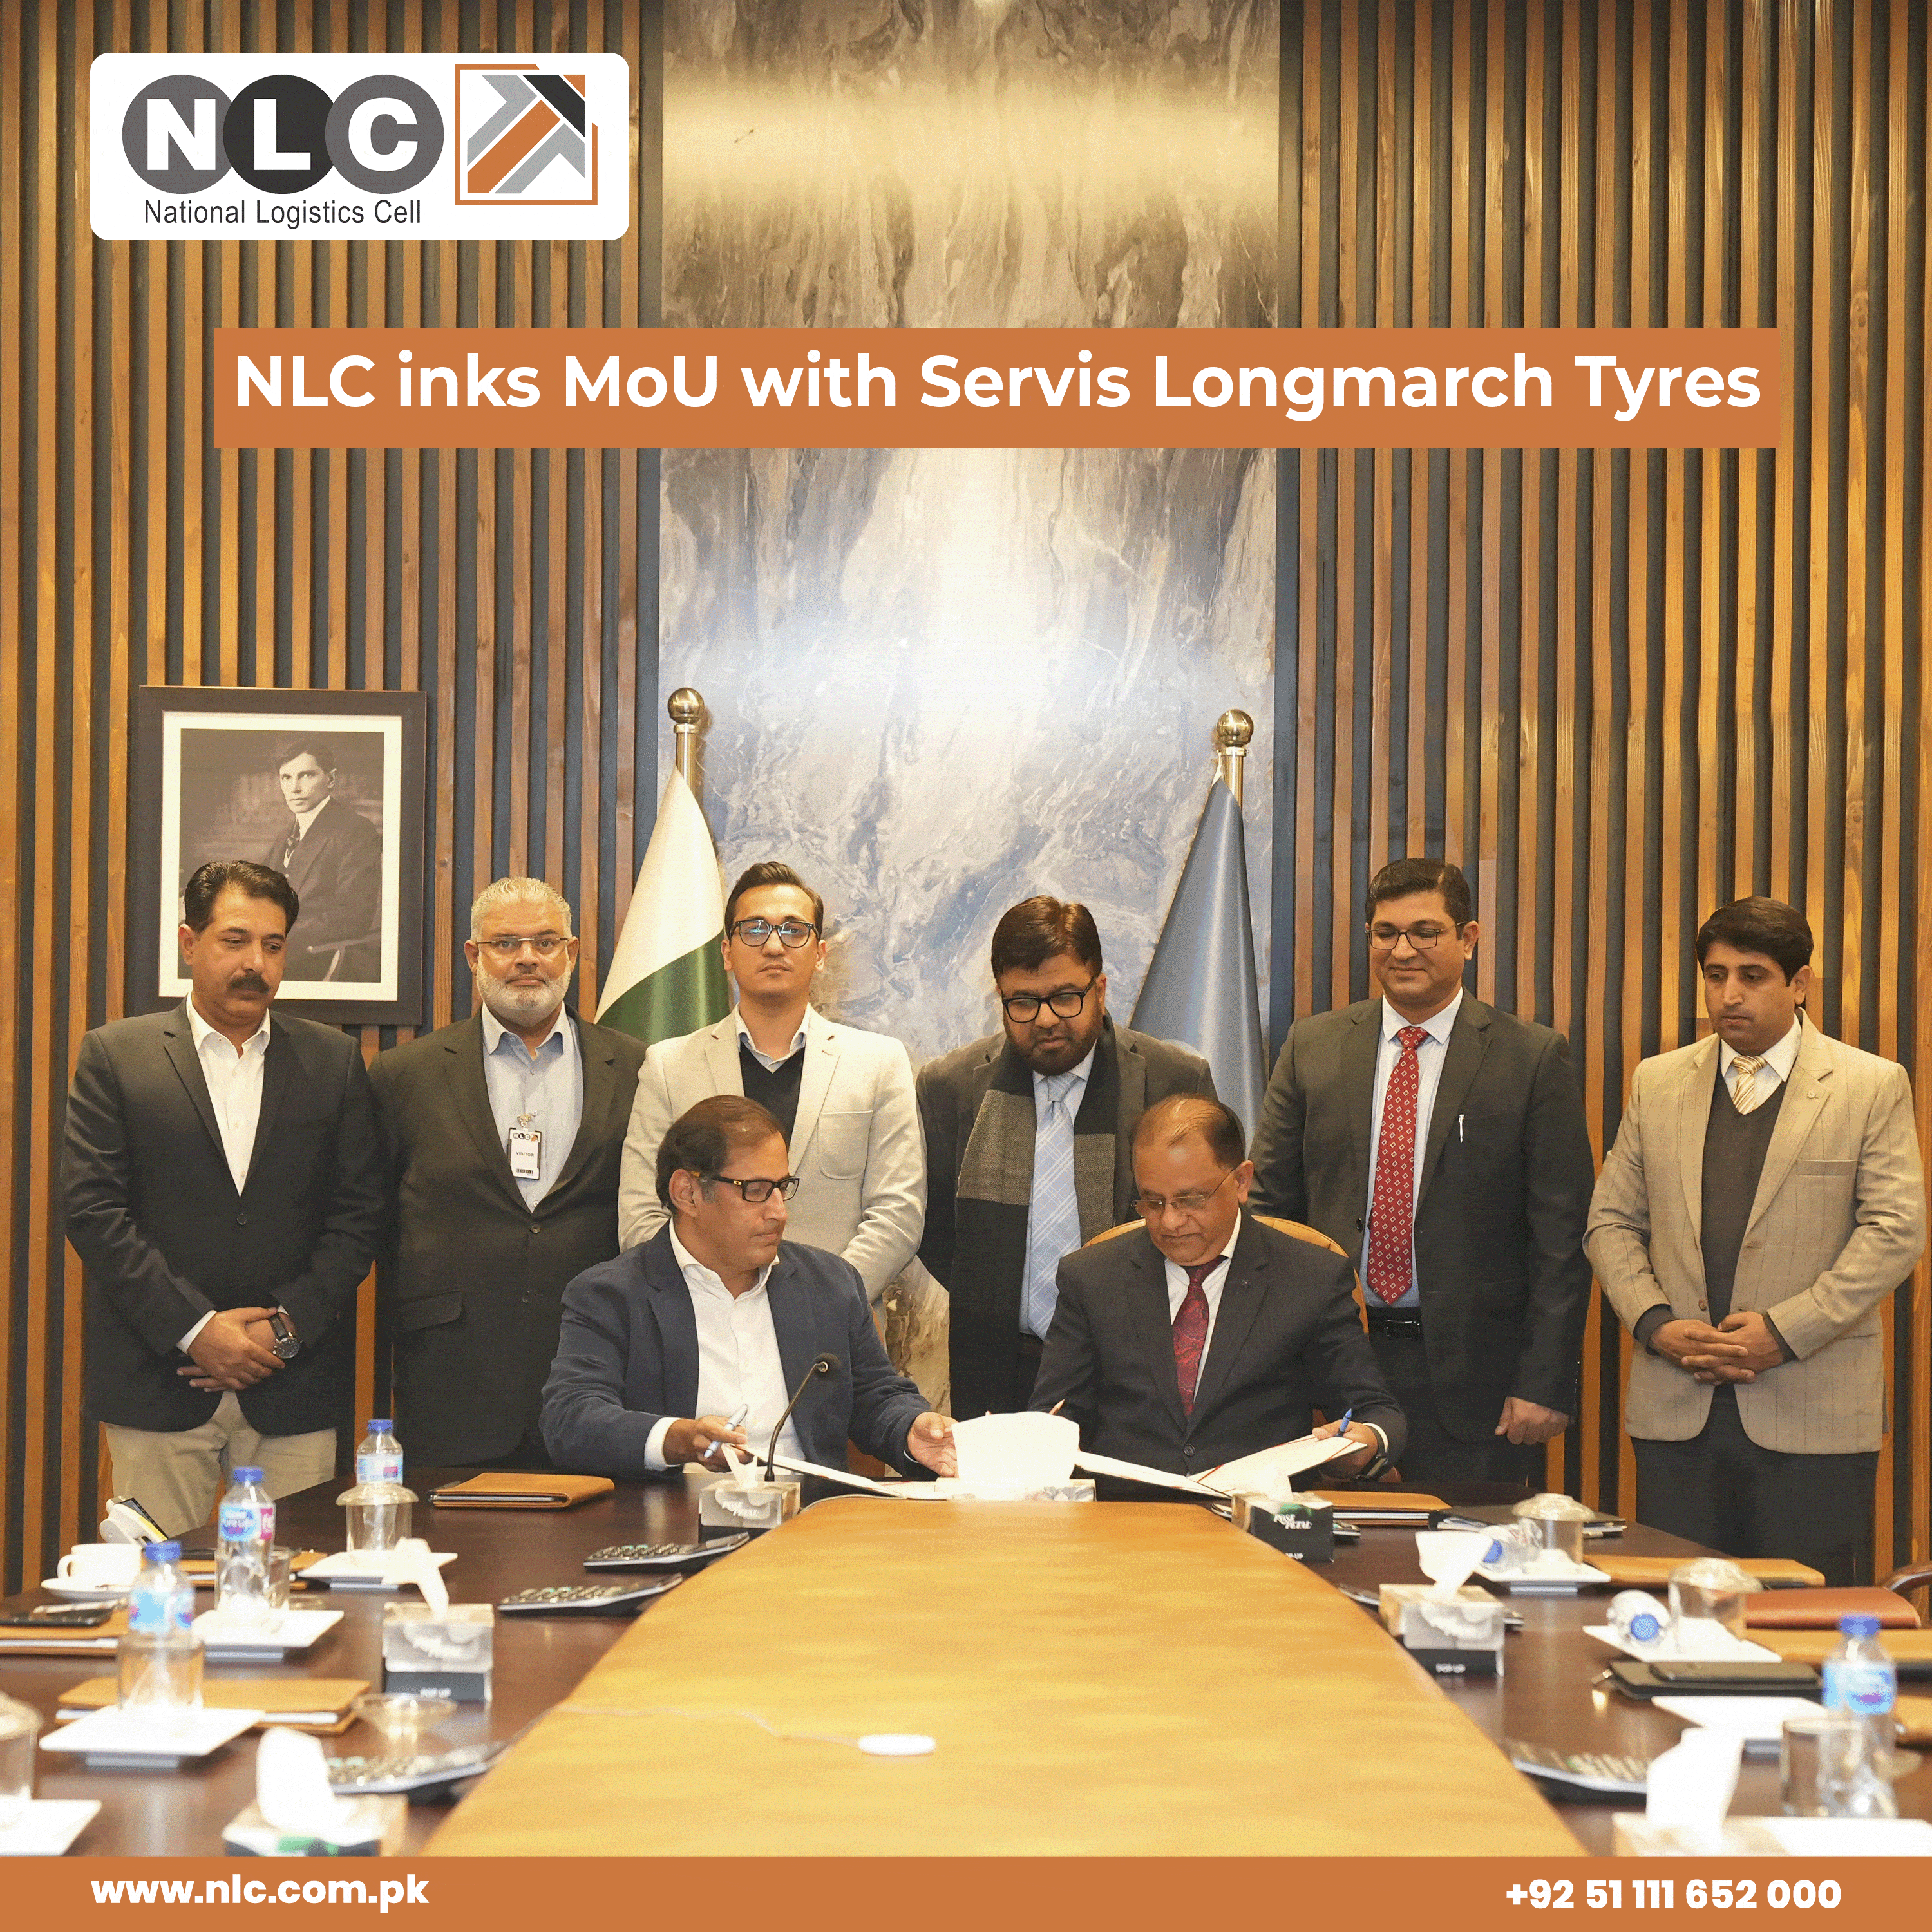 NLC inks MoU with Servis Longmarch Tyres